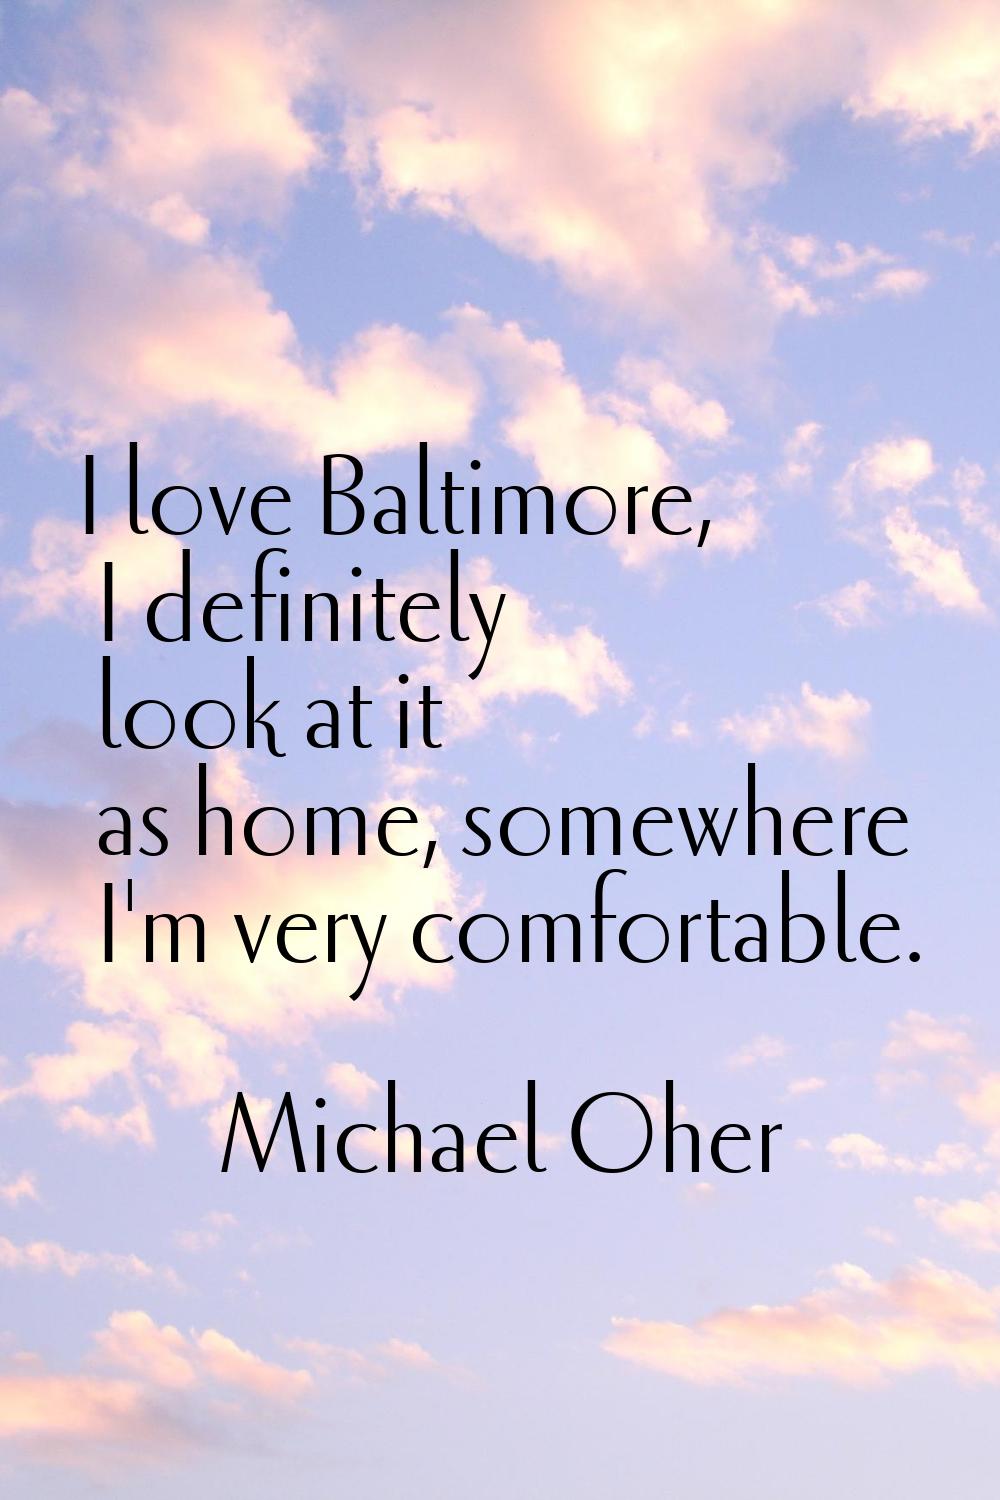 I love Baltimore, I definitely look at it as home, somewhere I'm very comfortable.